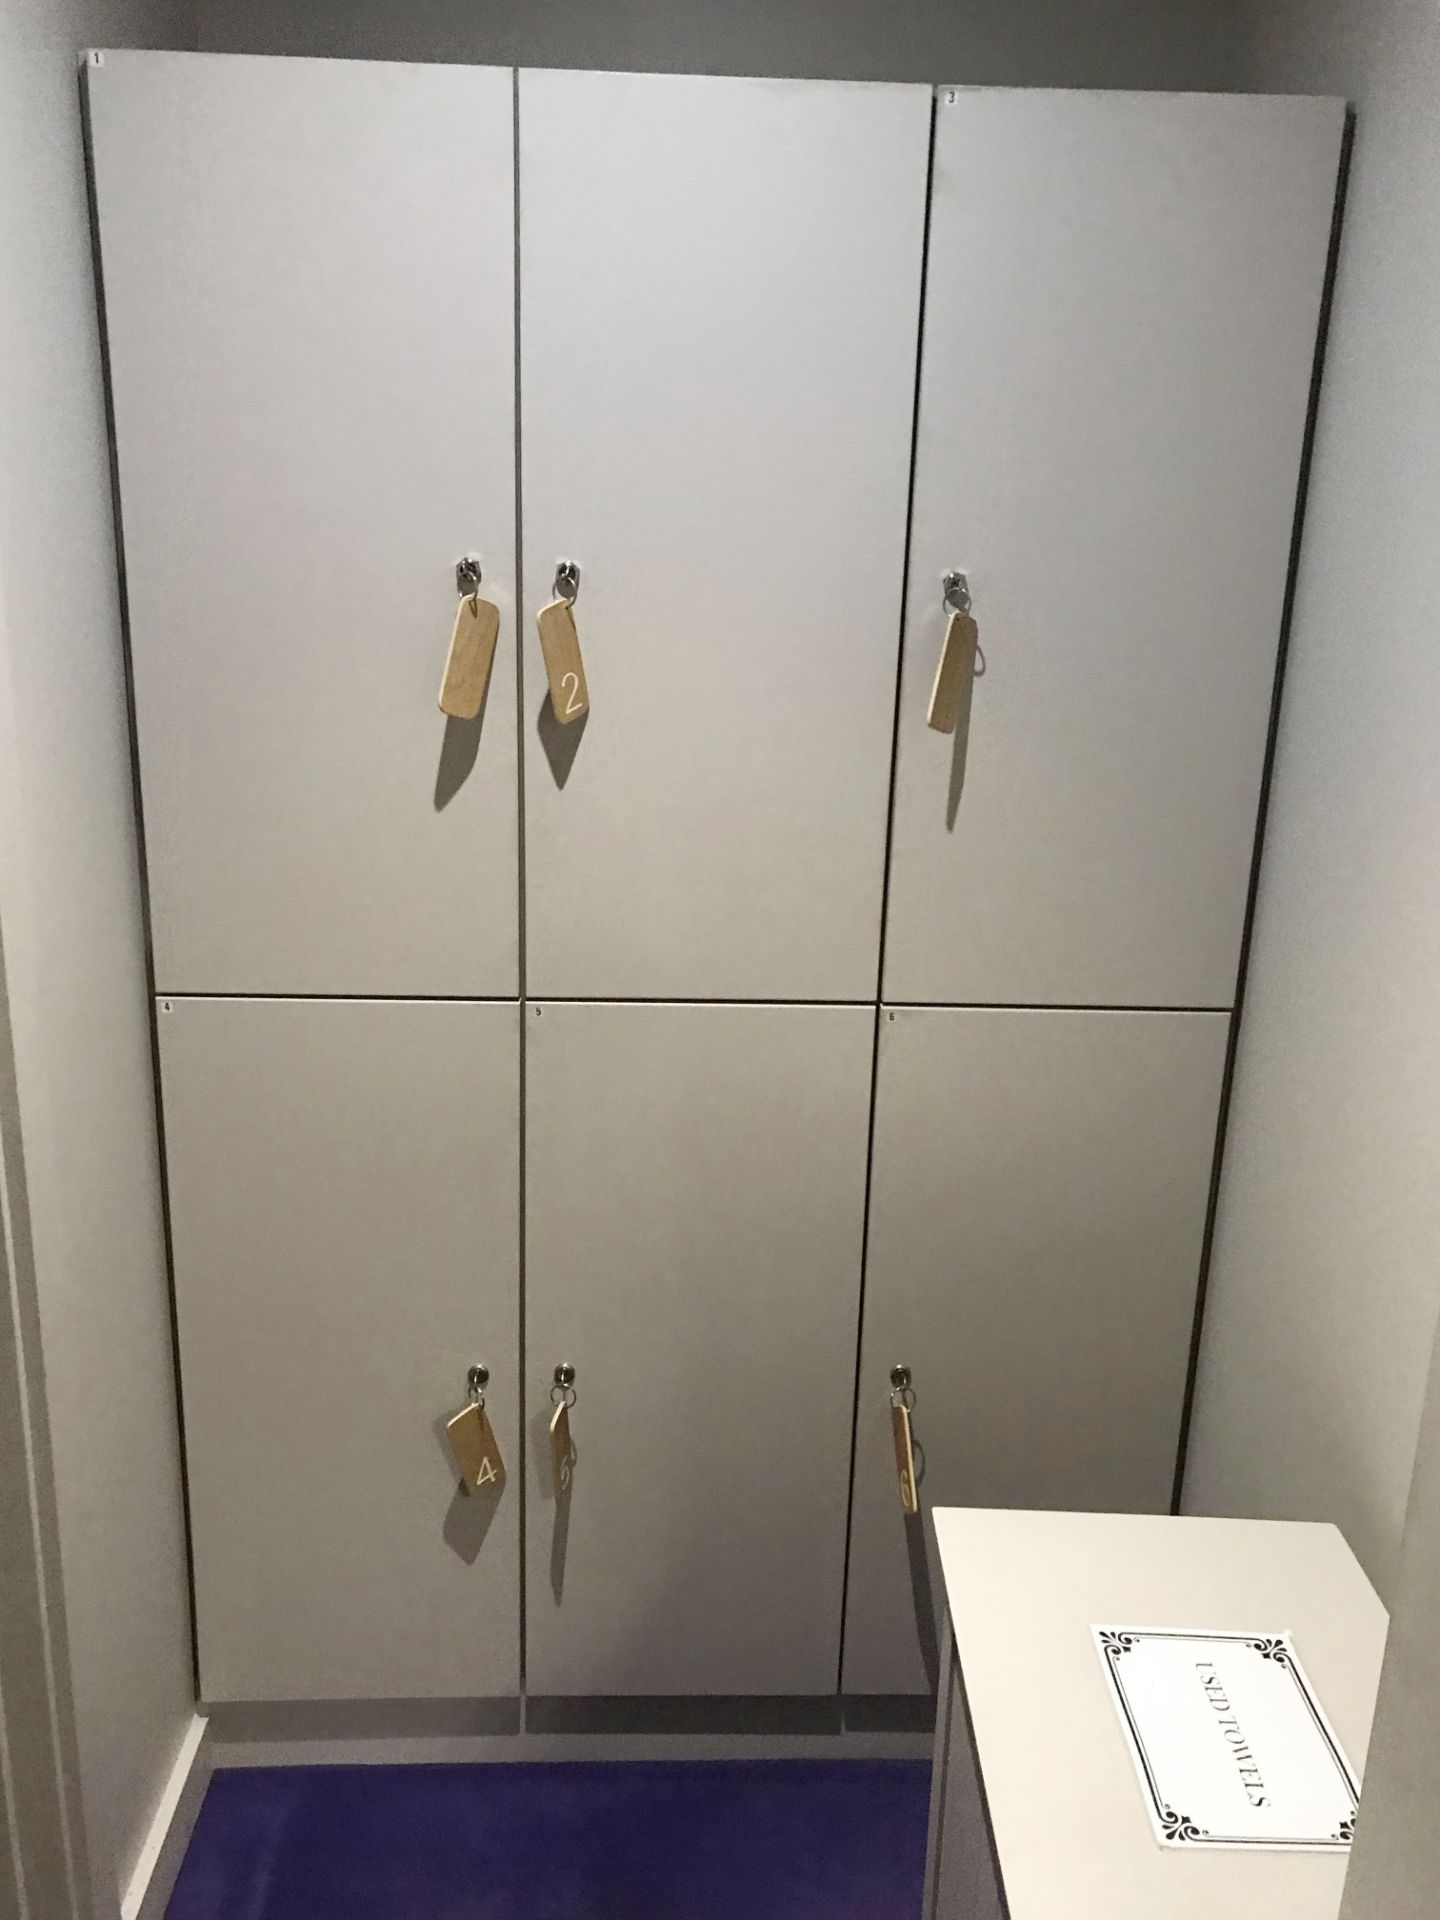 2 x Sets of 6 Lockers With Keys - Wooden Constriction With Laminate Doors - Lot includes Two Units